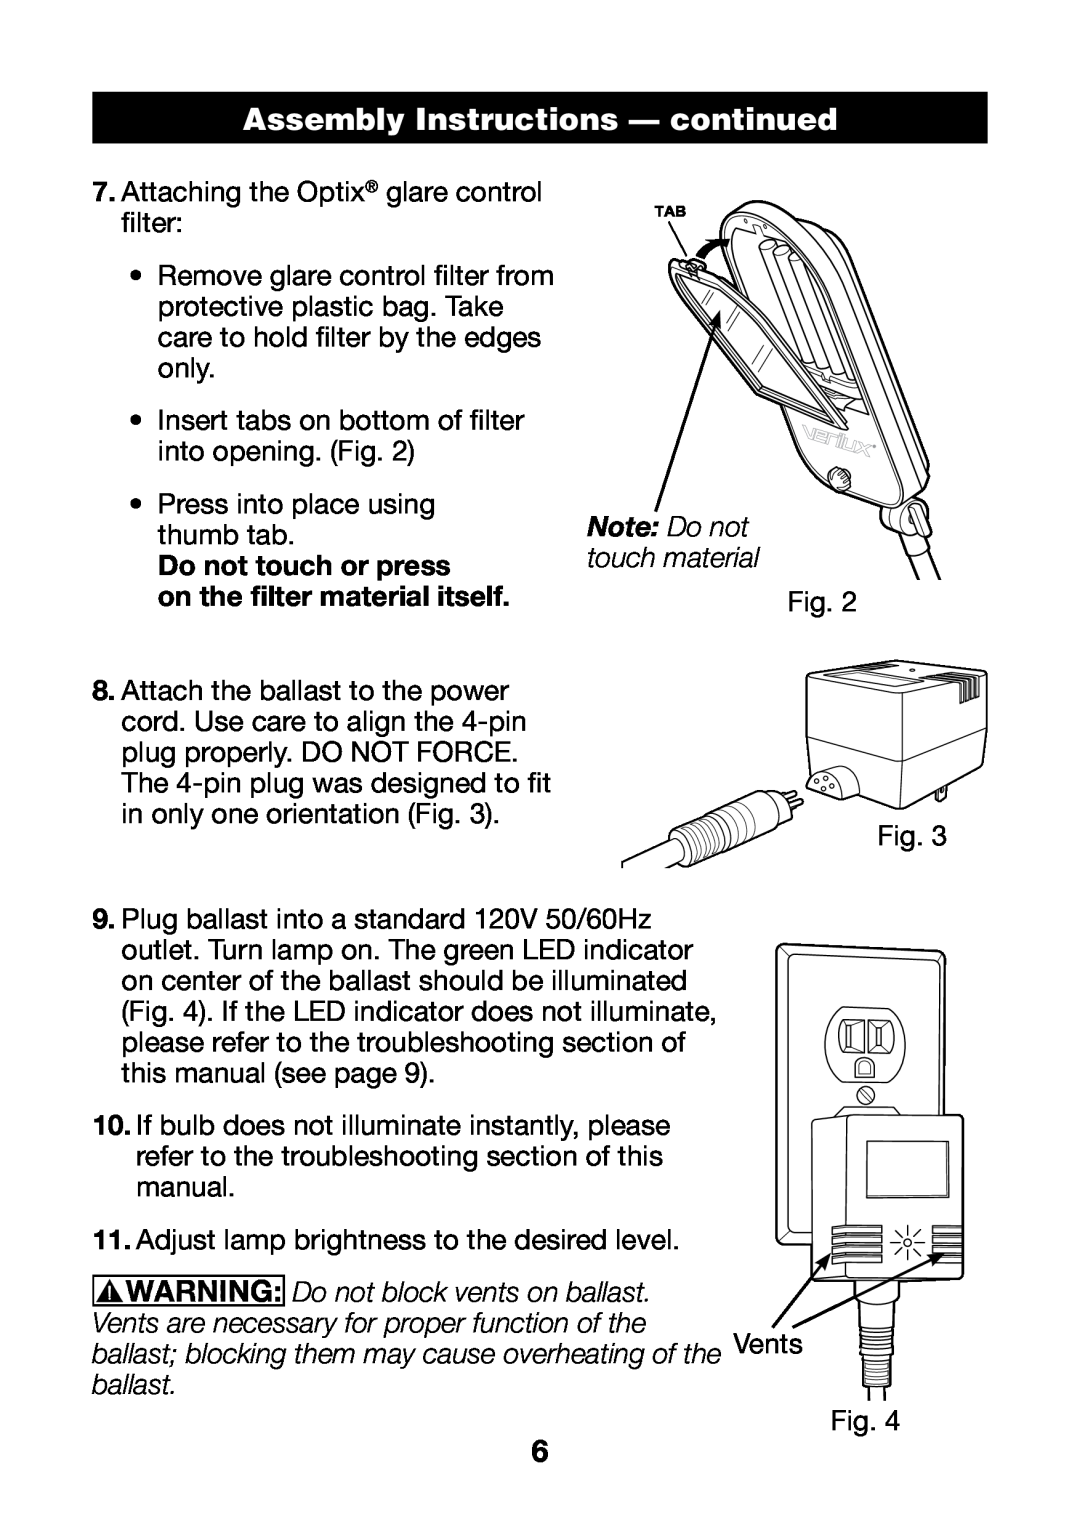 Verilux VF03 manual Assembly Instructions - continued, Do not touch or press, on the filter material itself 